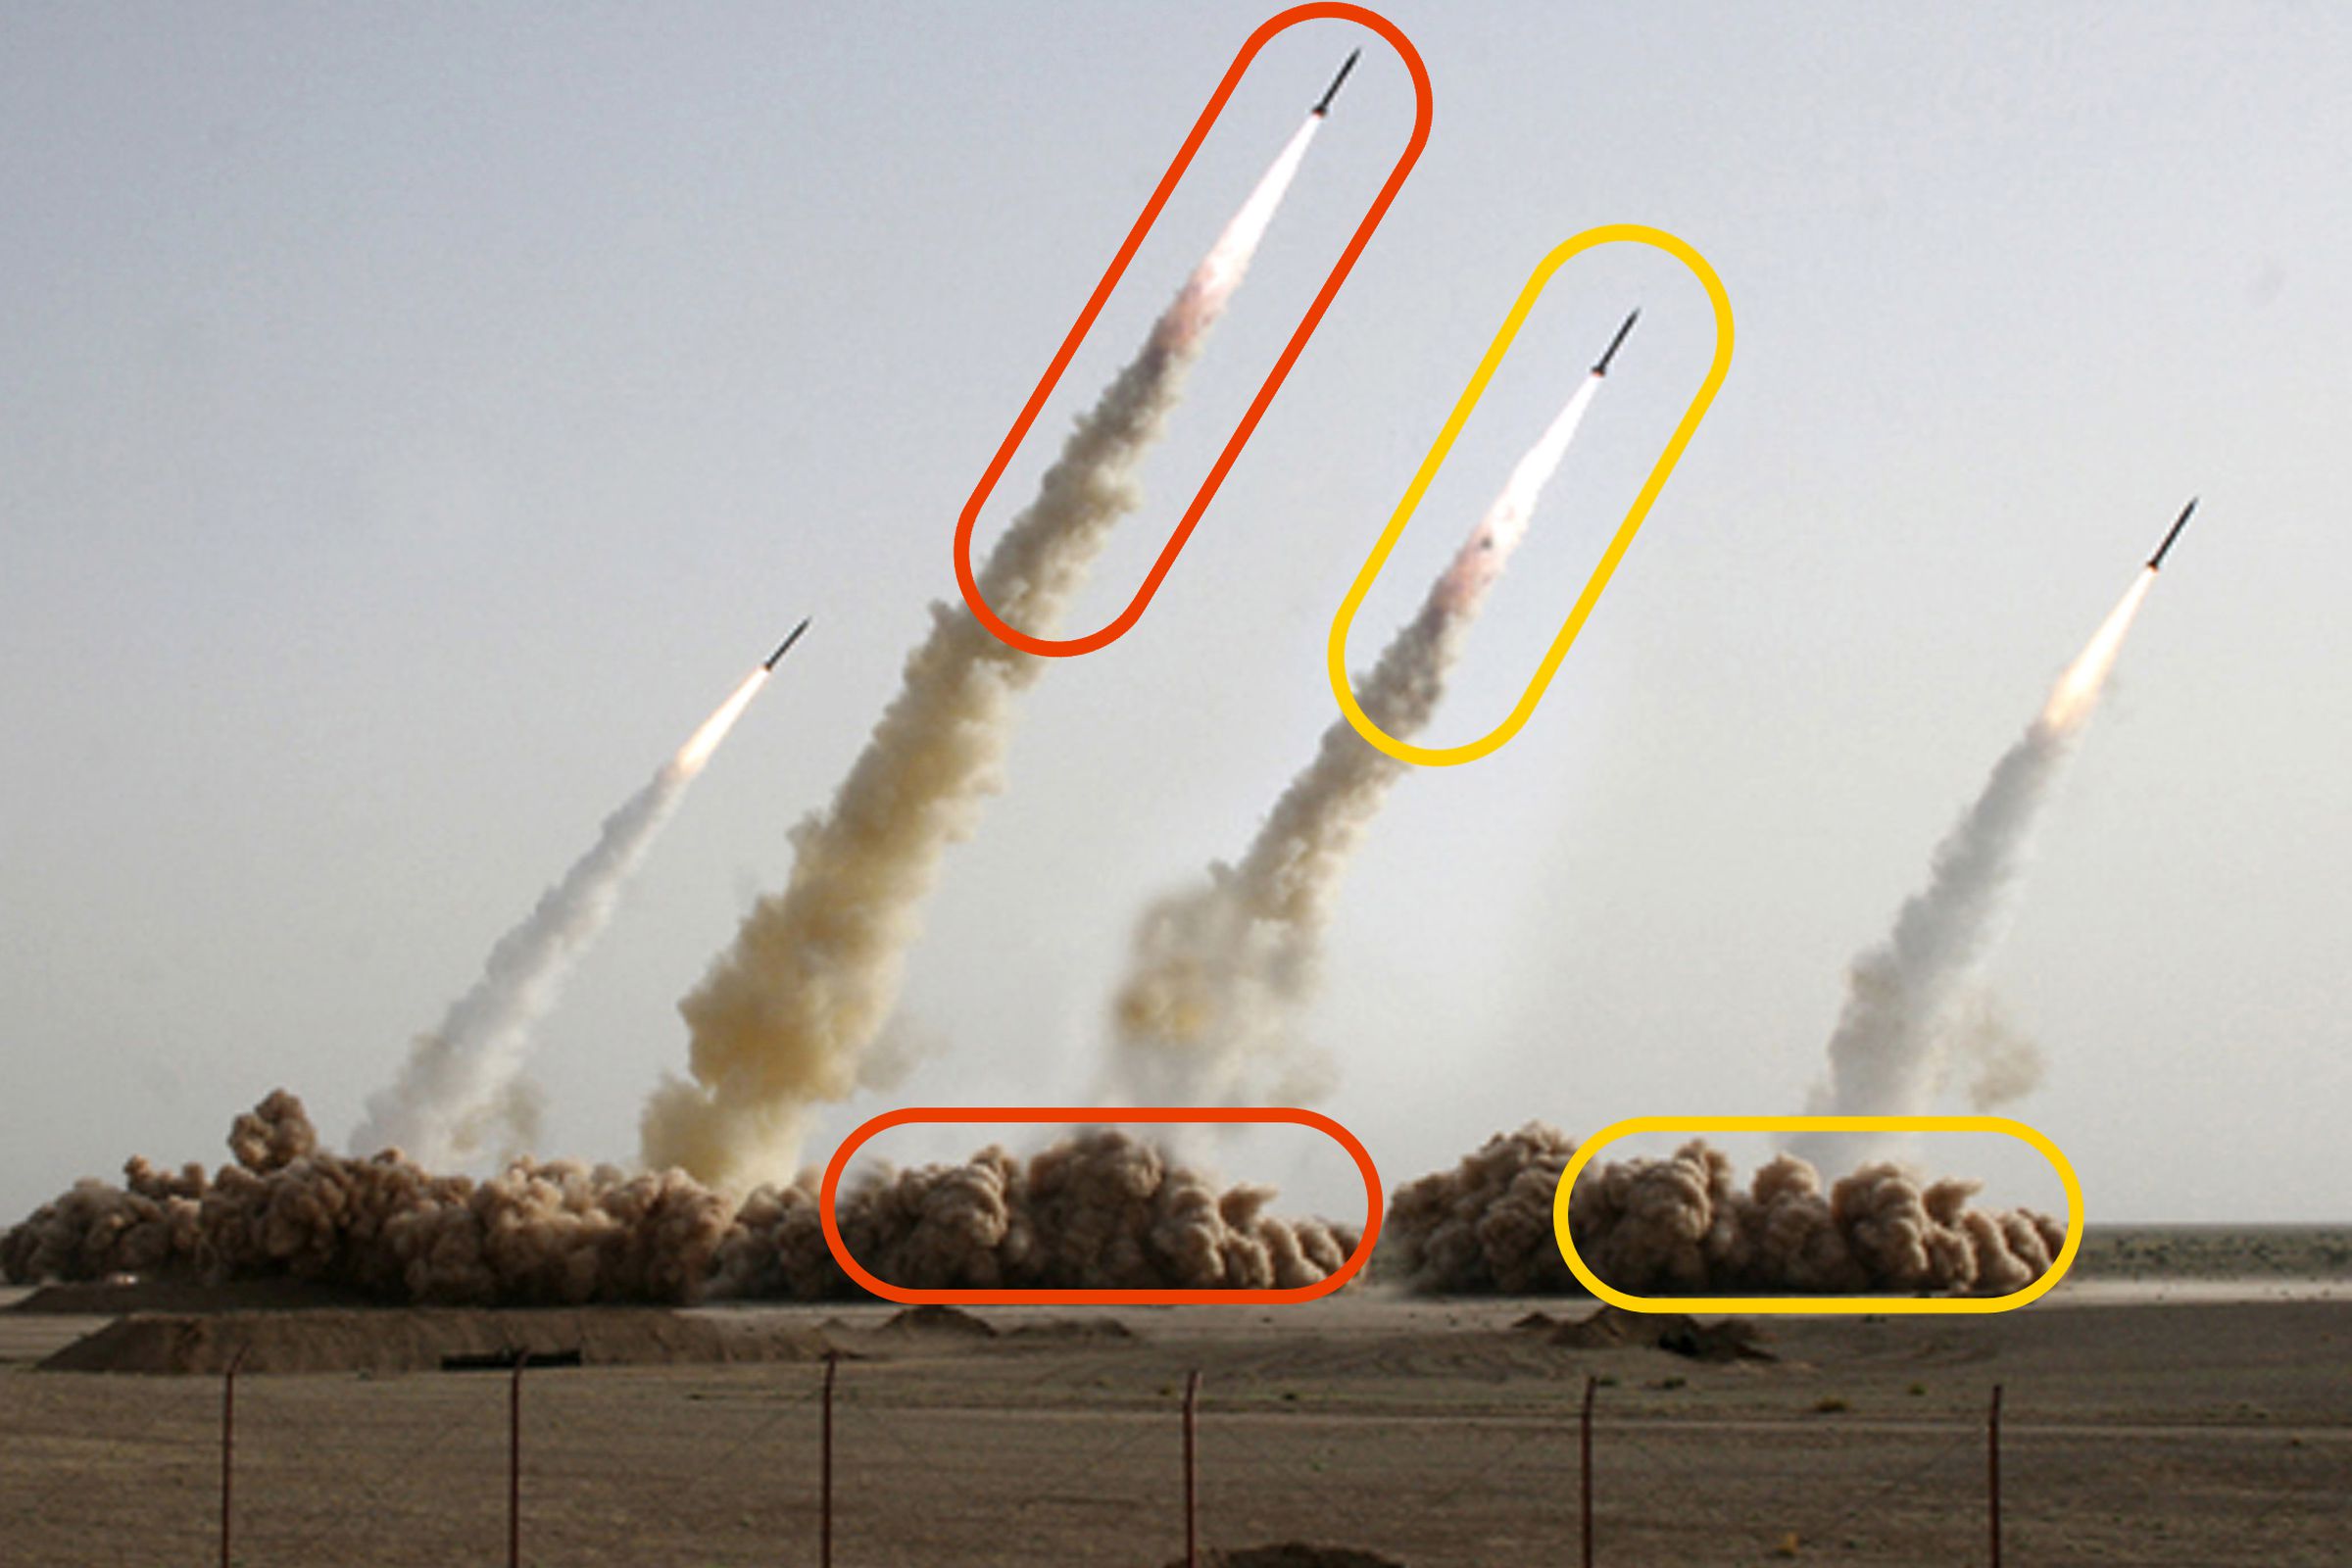 A famous edited image of a missile launch released by the Iranian government in 2008. (This image was not used in the training or testing of Adobe’s research project.) 